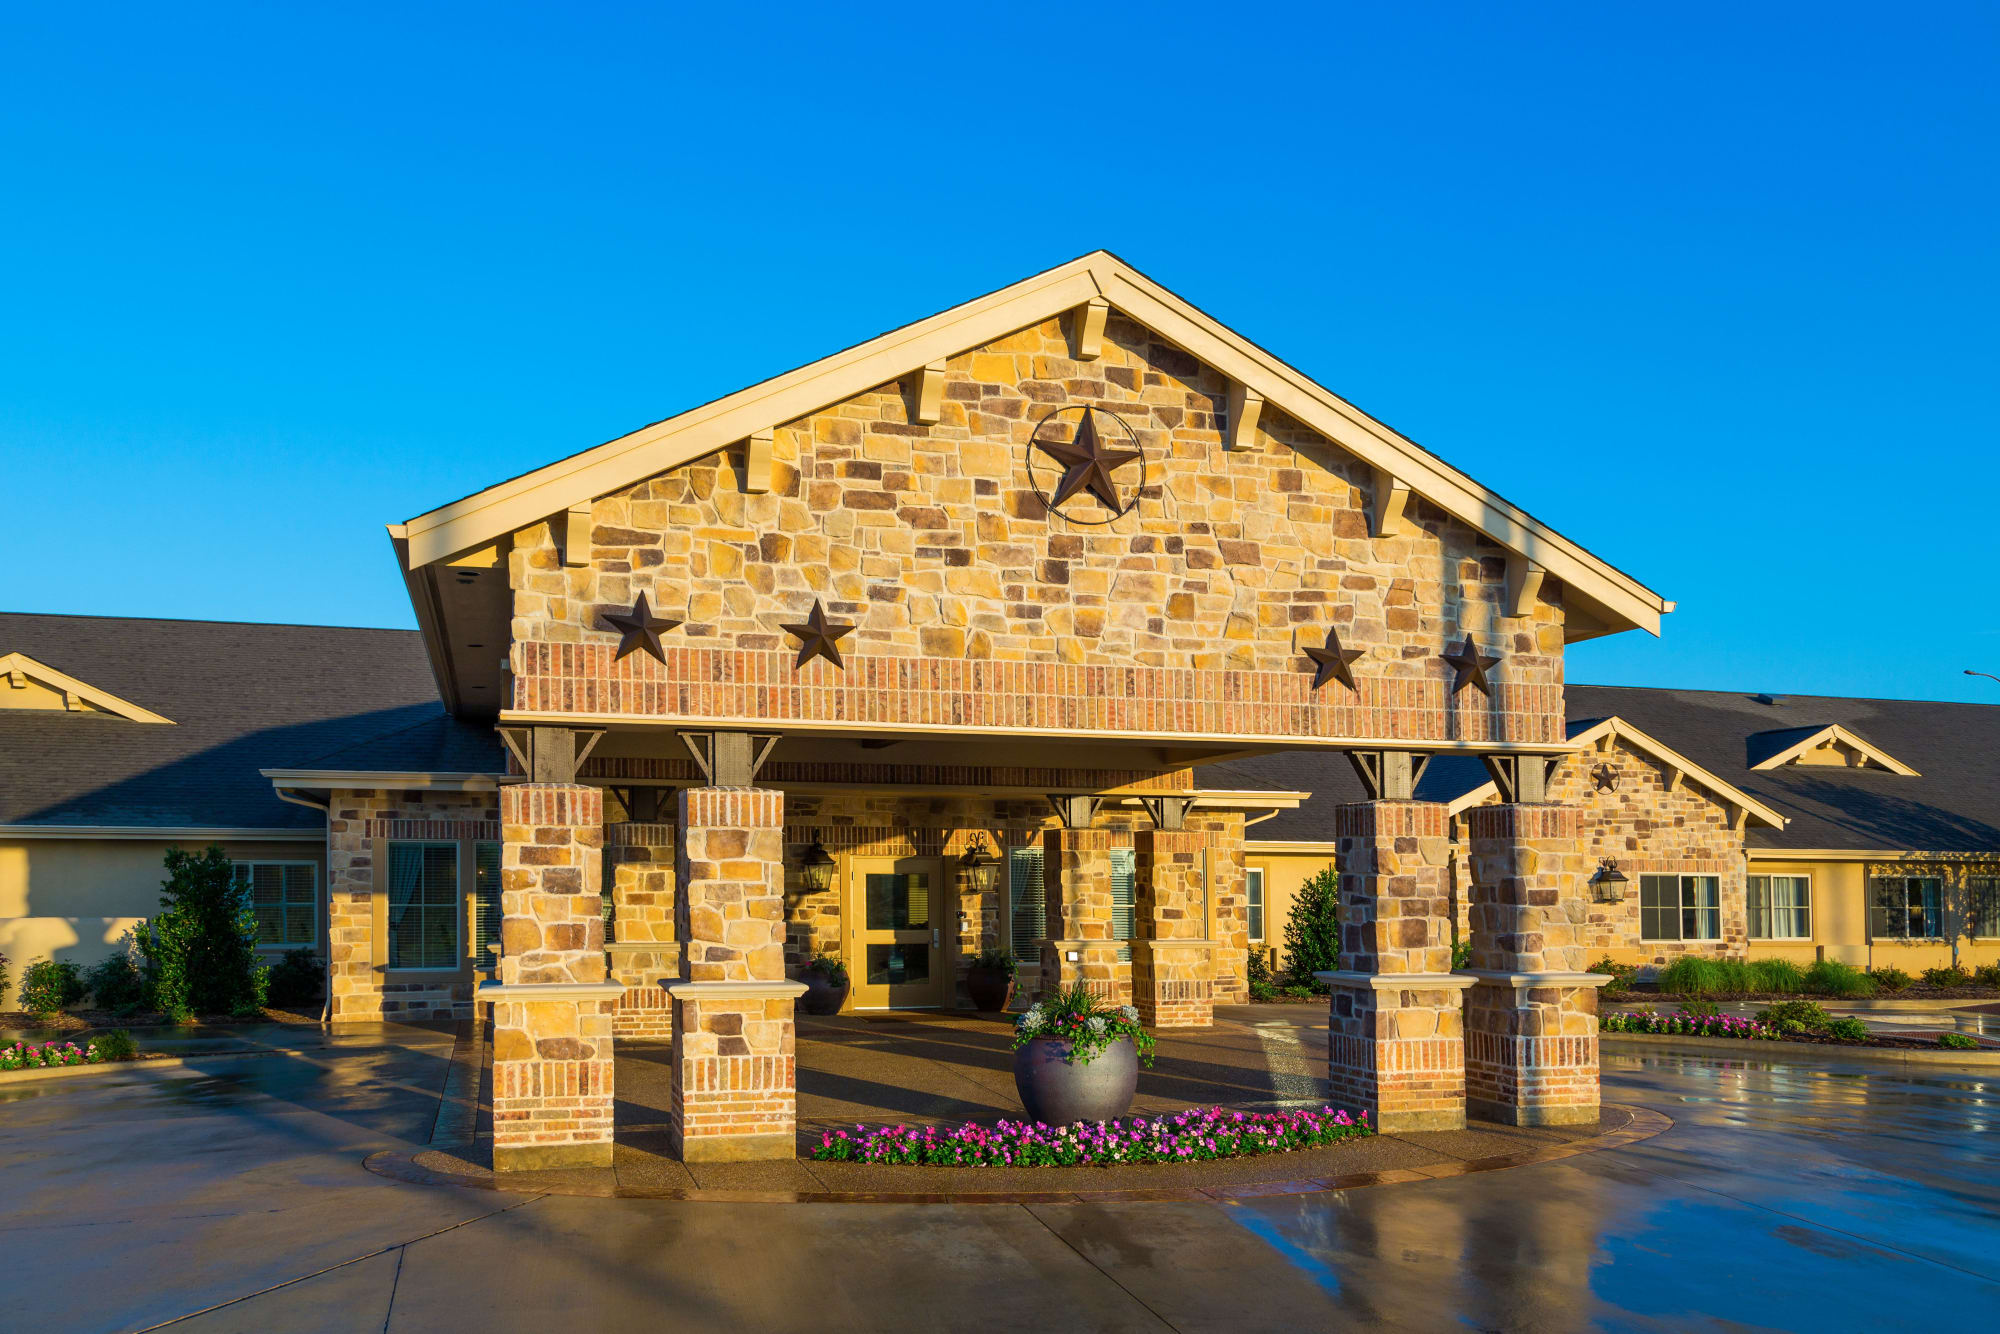 Sunny main entrance with star decorations at Saddlebrook Oxford Memory Care in Frisco, Texas